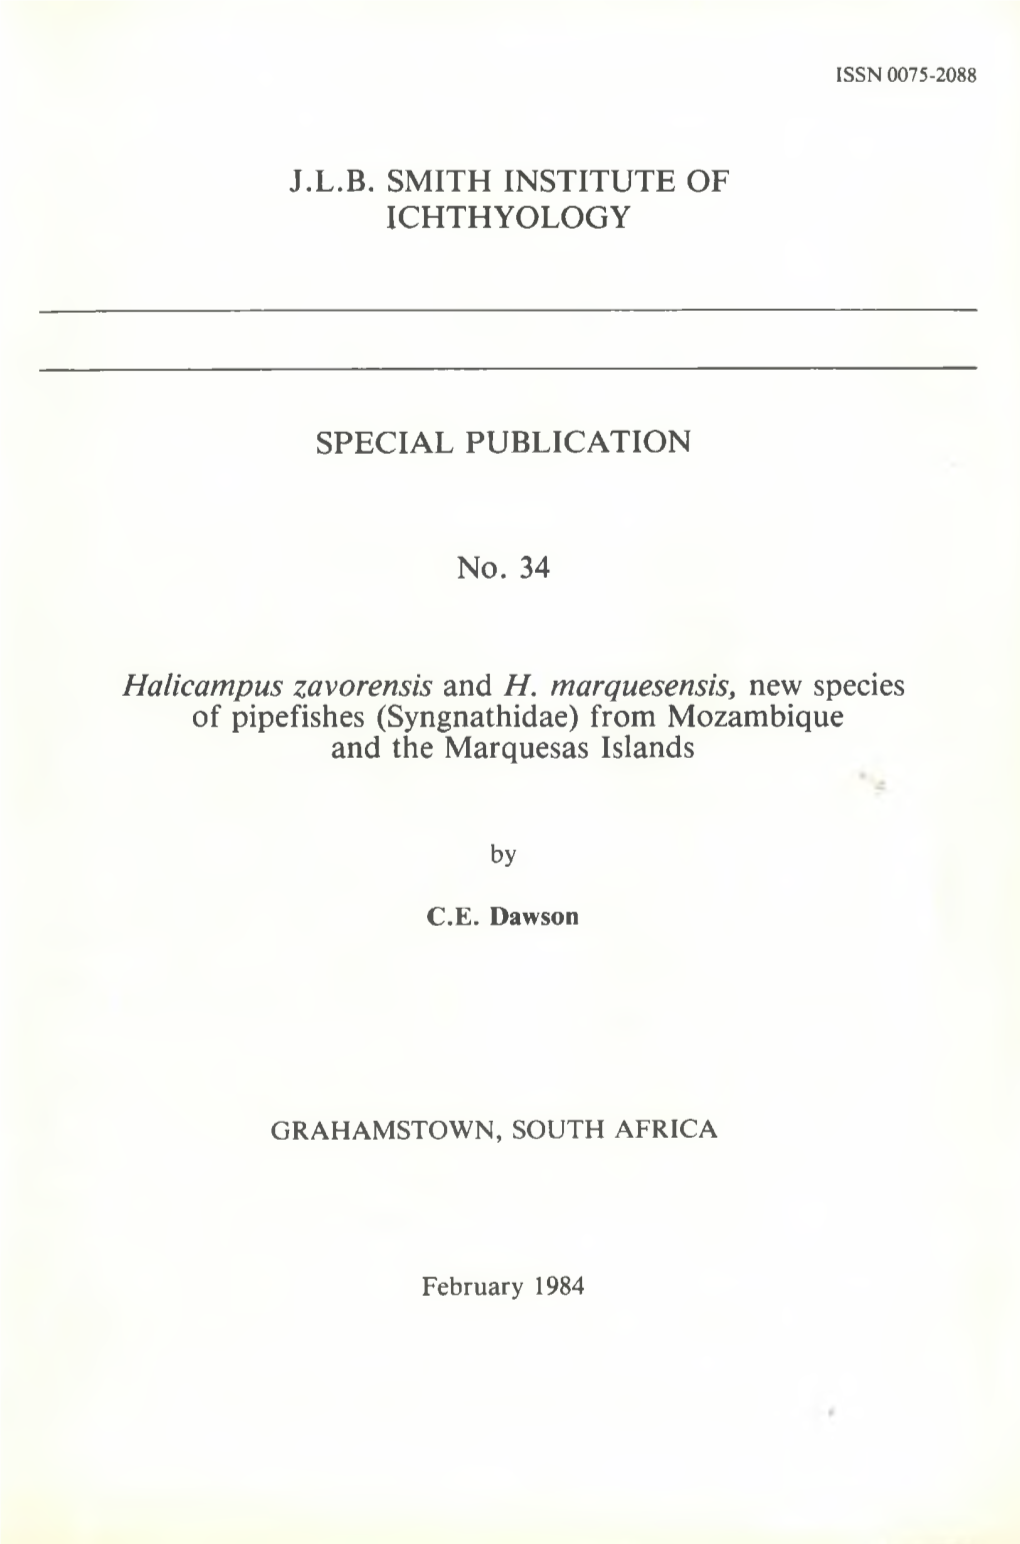 Halicampus Zavorensis and H. Marquesensis, New Species of Pipefishes (Syngnathidae) from Mozambique and the Marquesas Islands